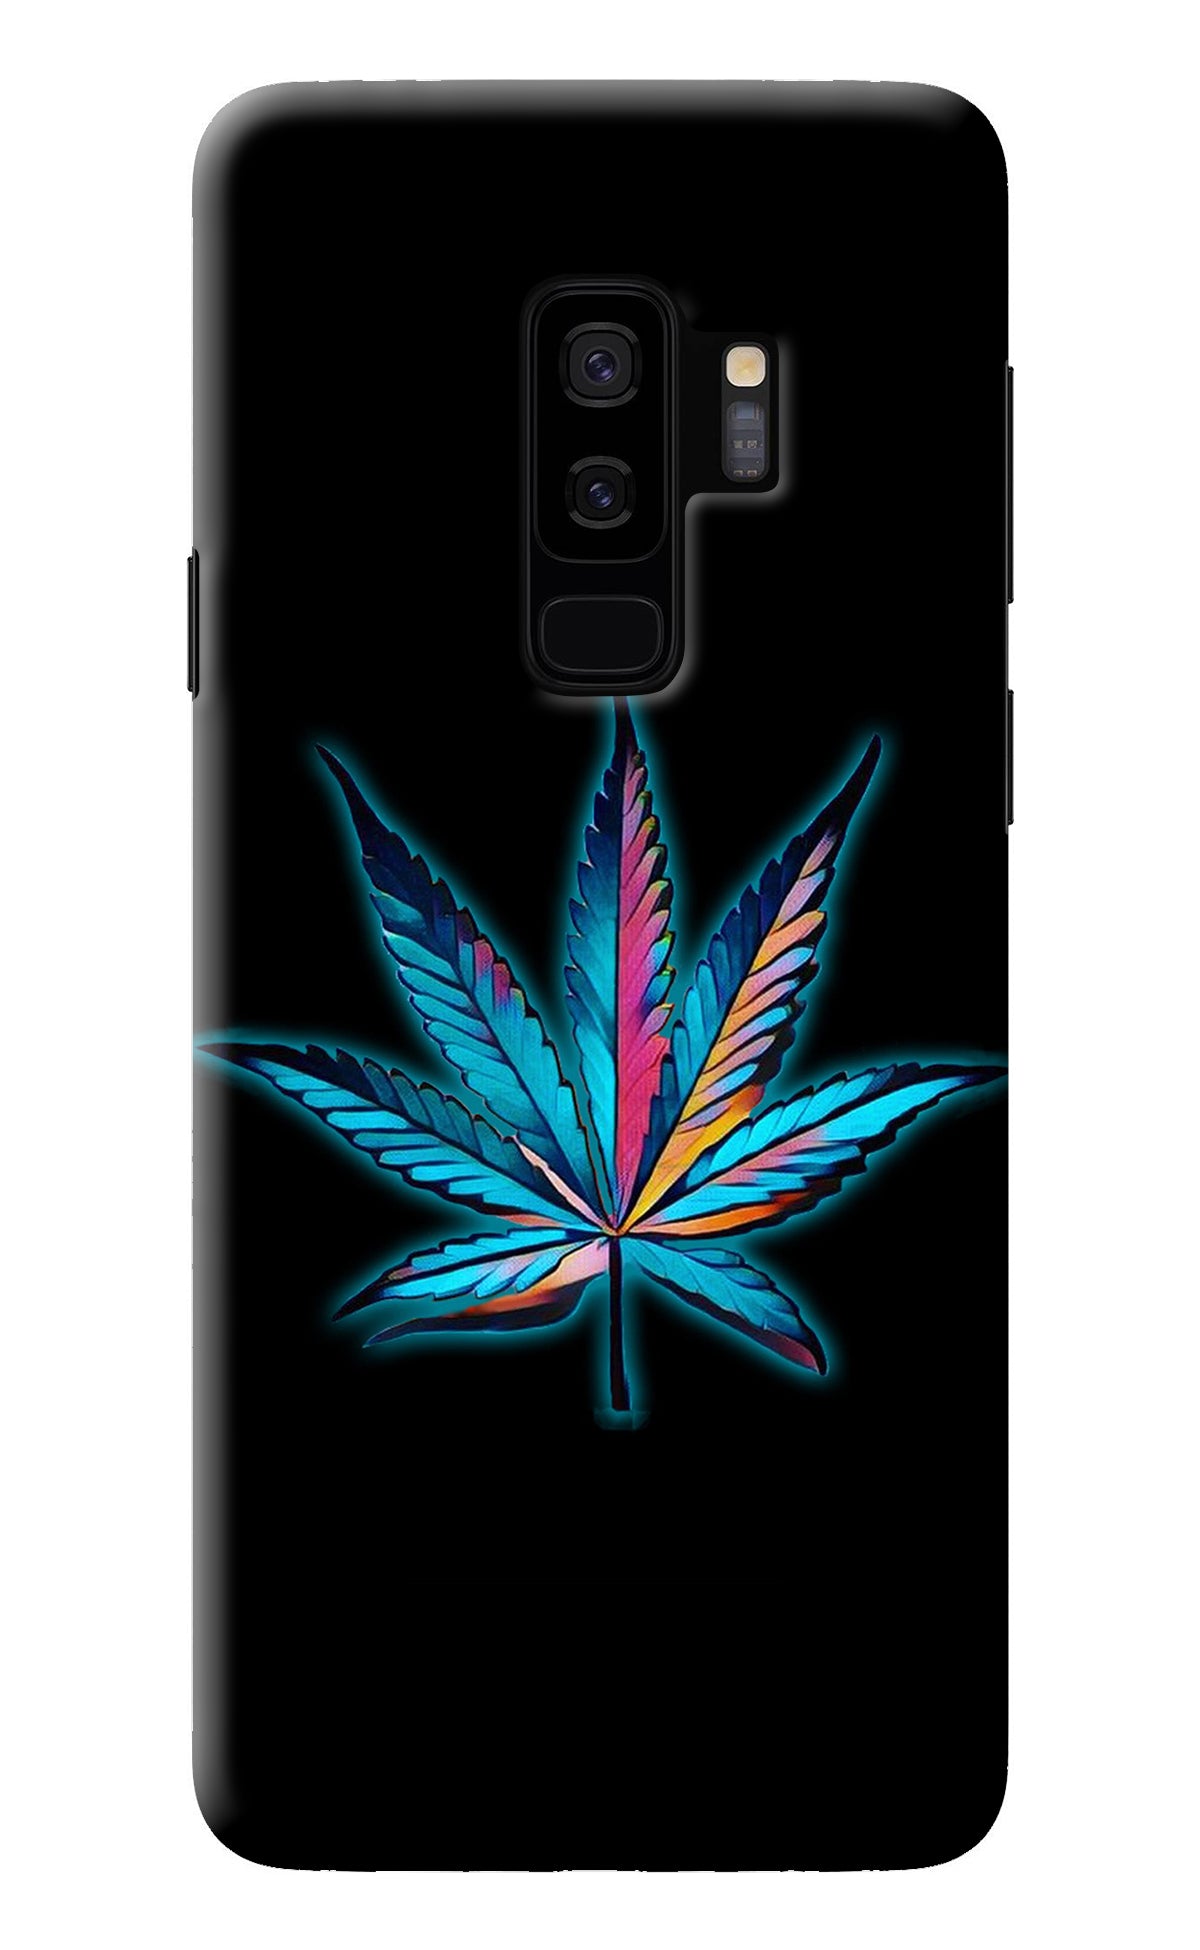 Weed Samsung S9 Plus Back Cover